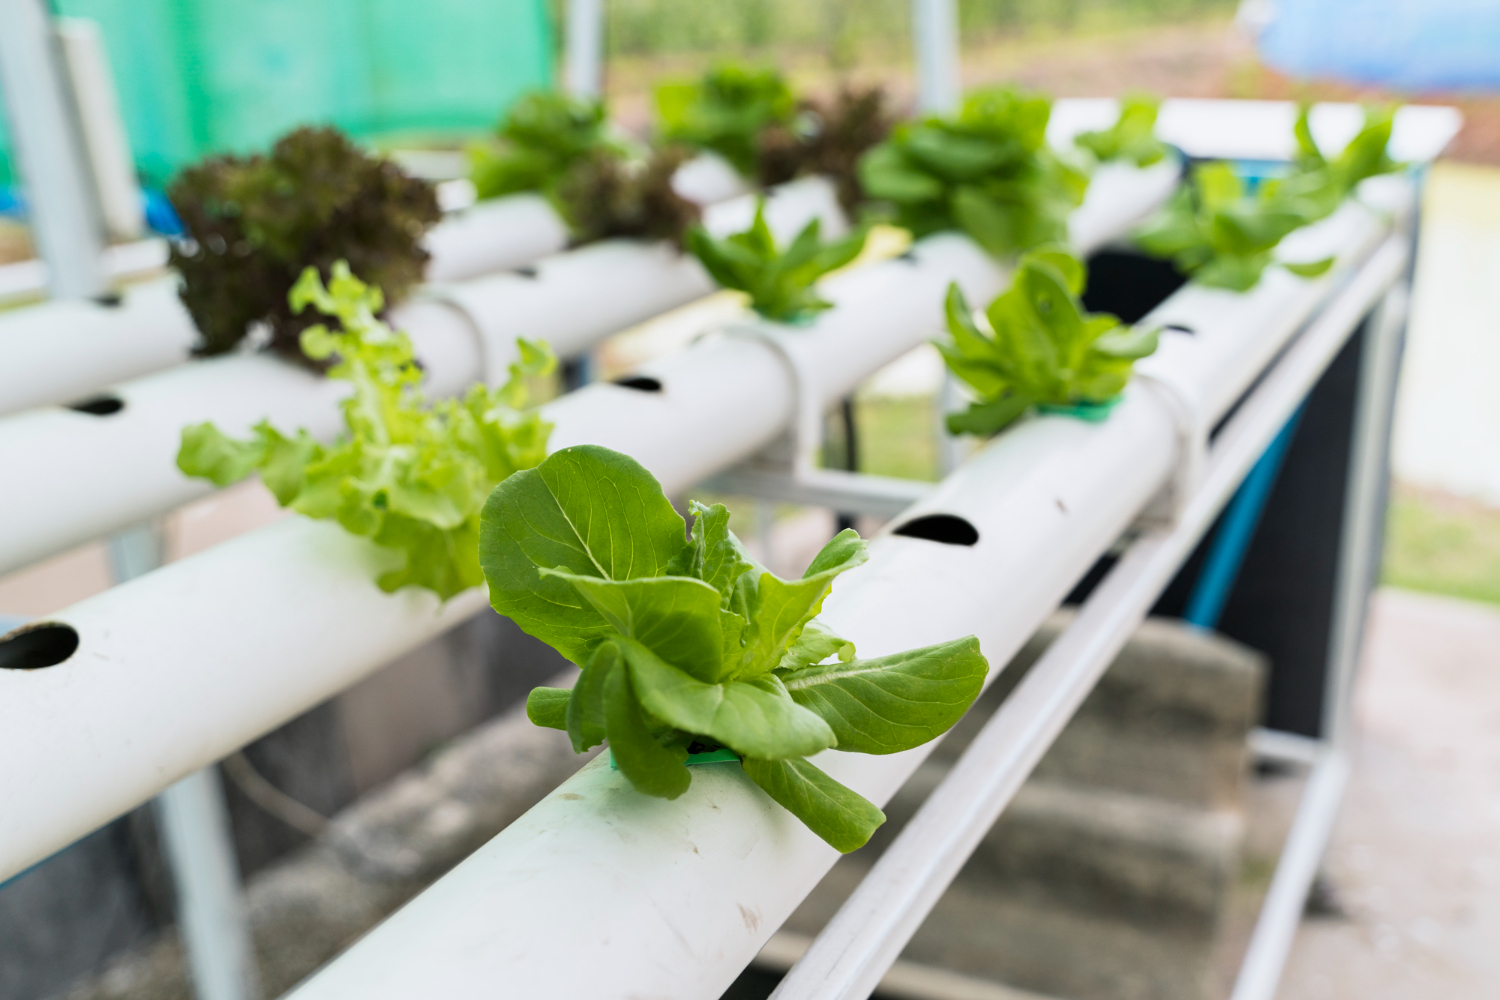 Planet Farms from Italy secures €36.6 Million for Vertical Farming Growth in Italy and the UK